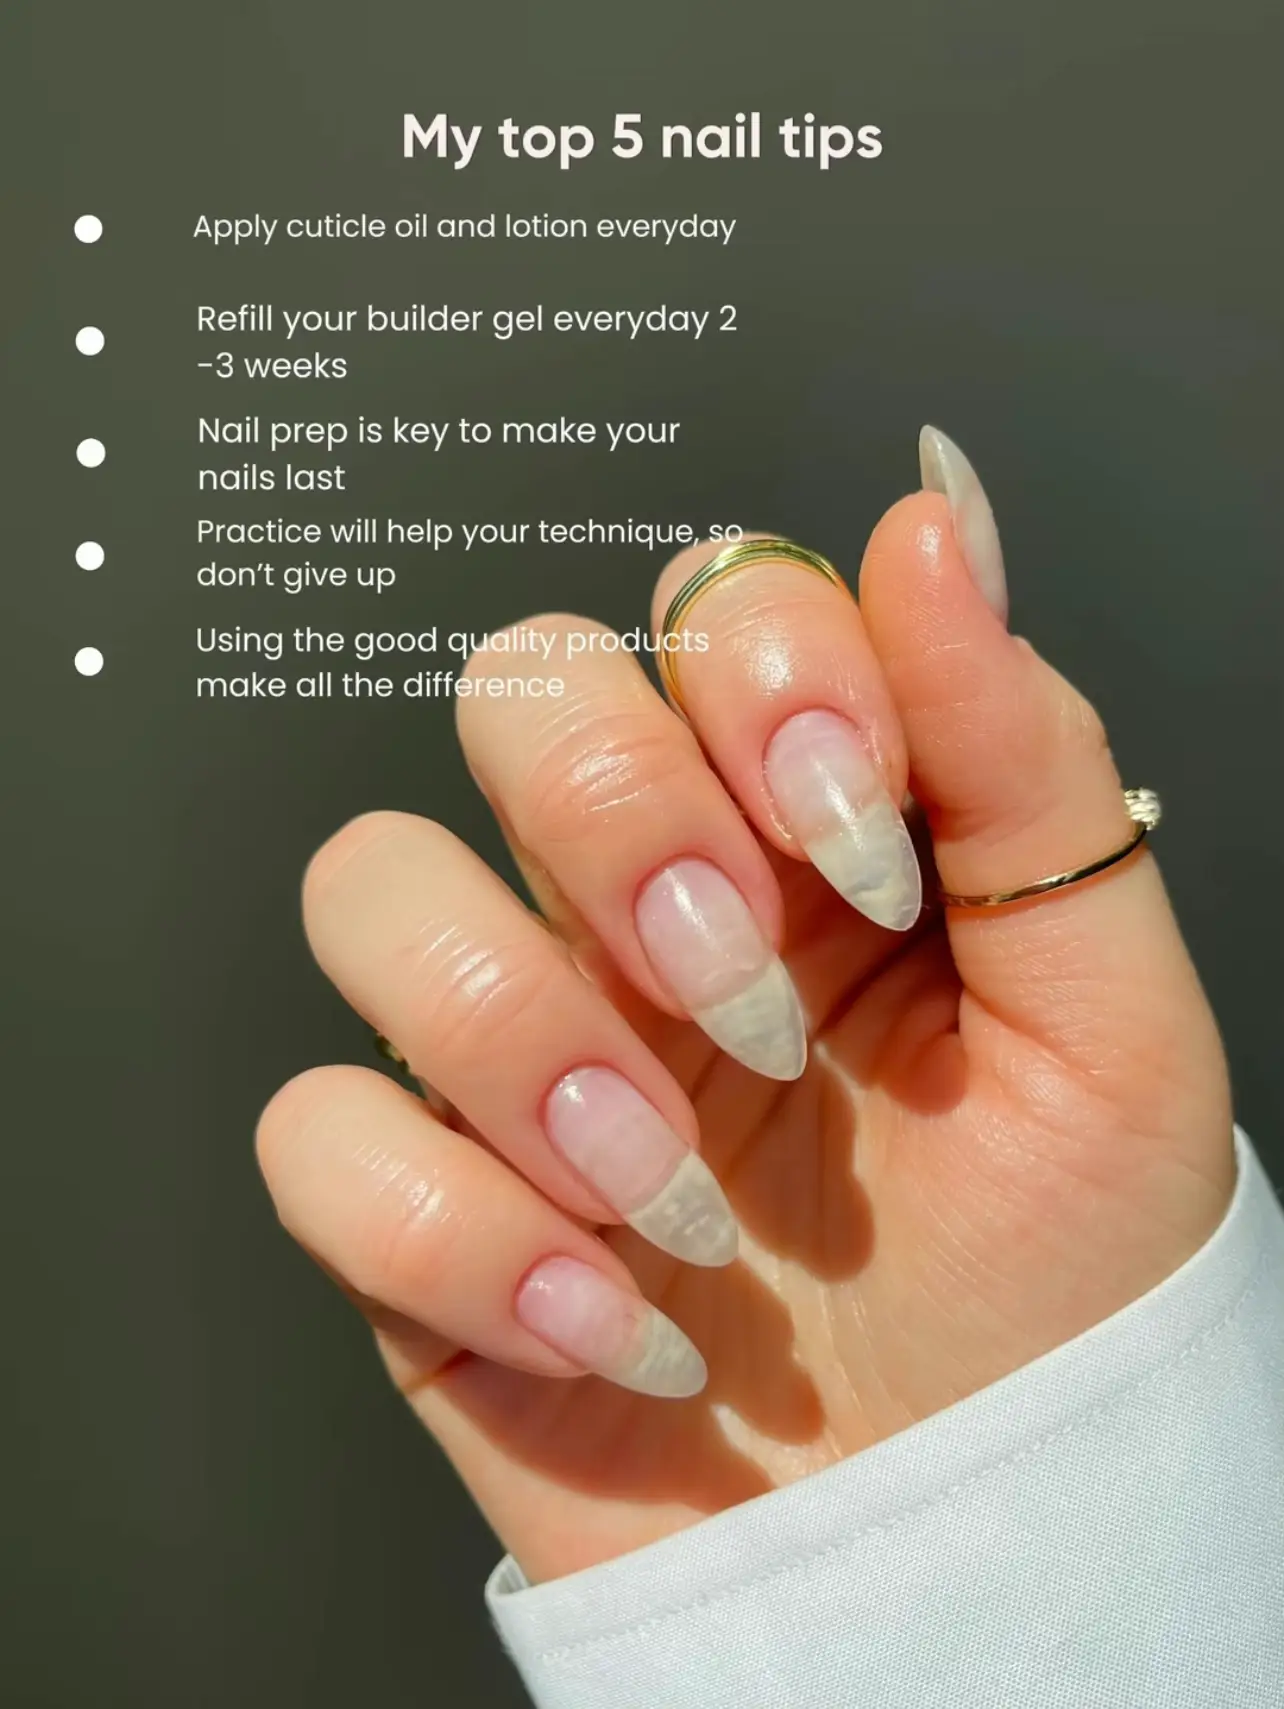 How can I improve my natural nails?